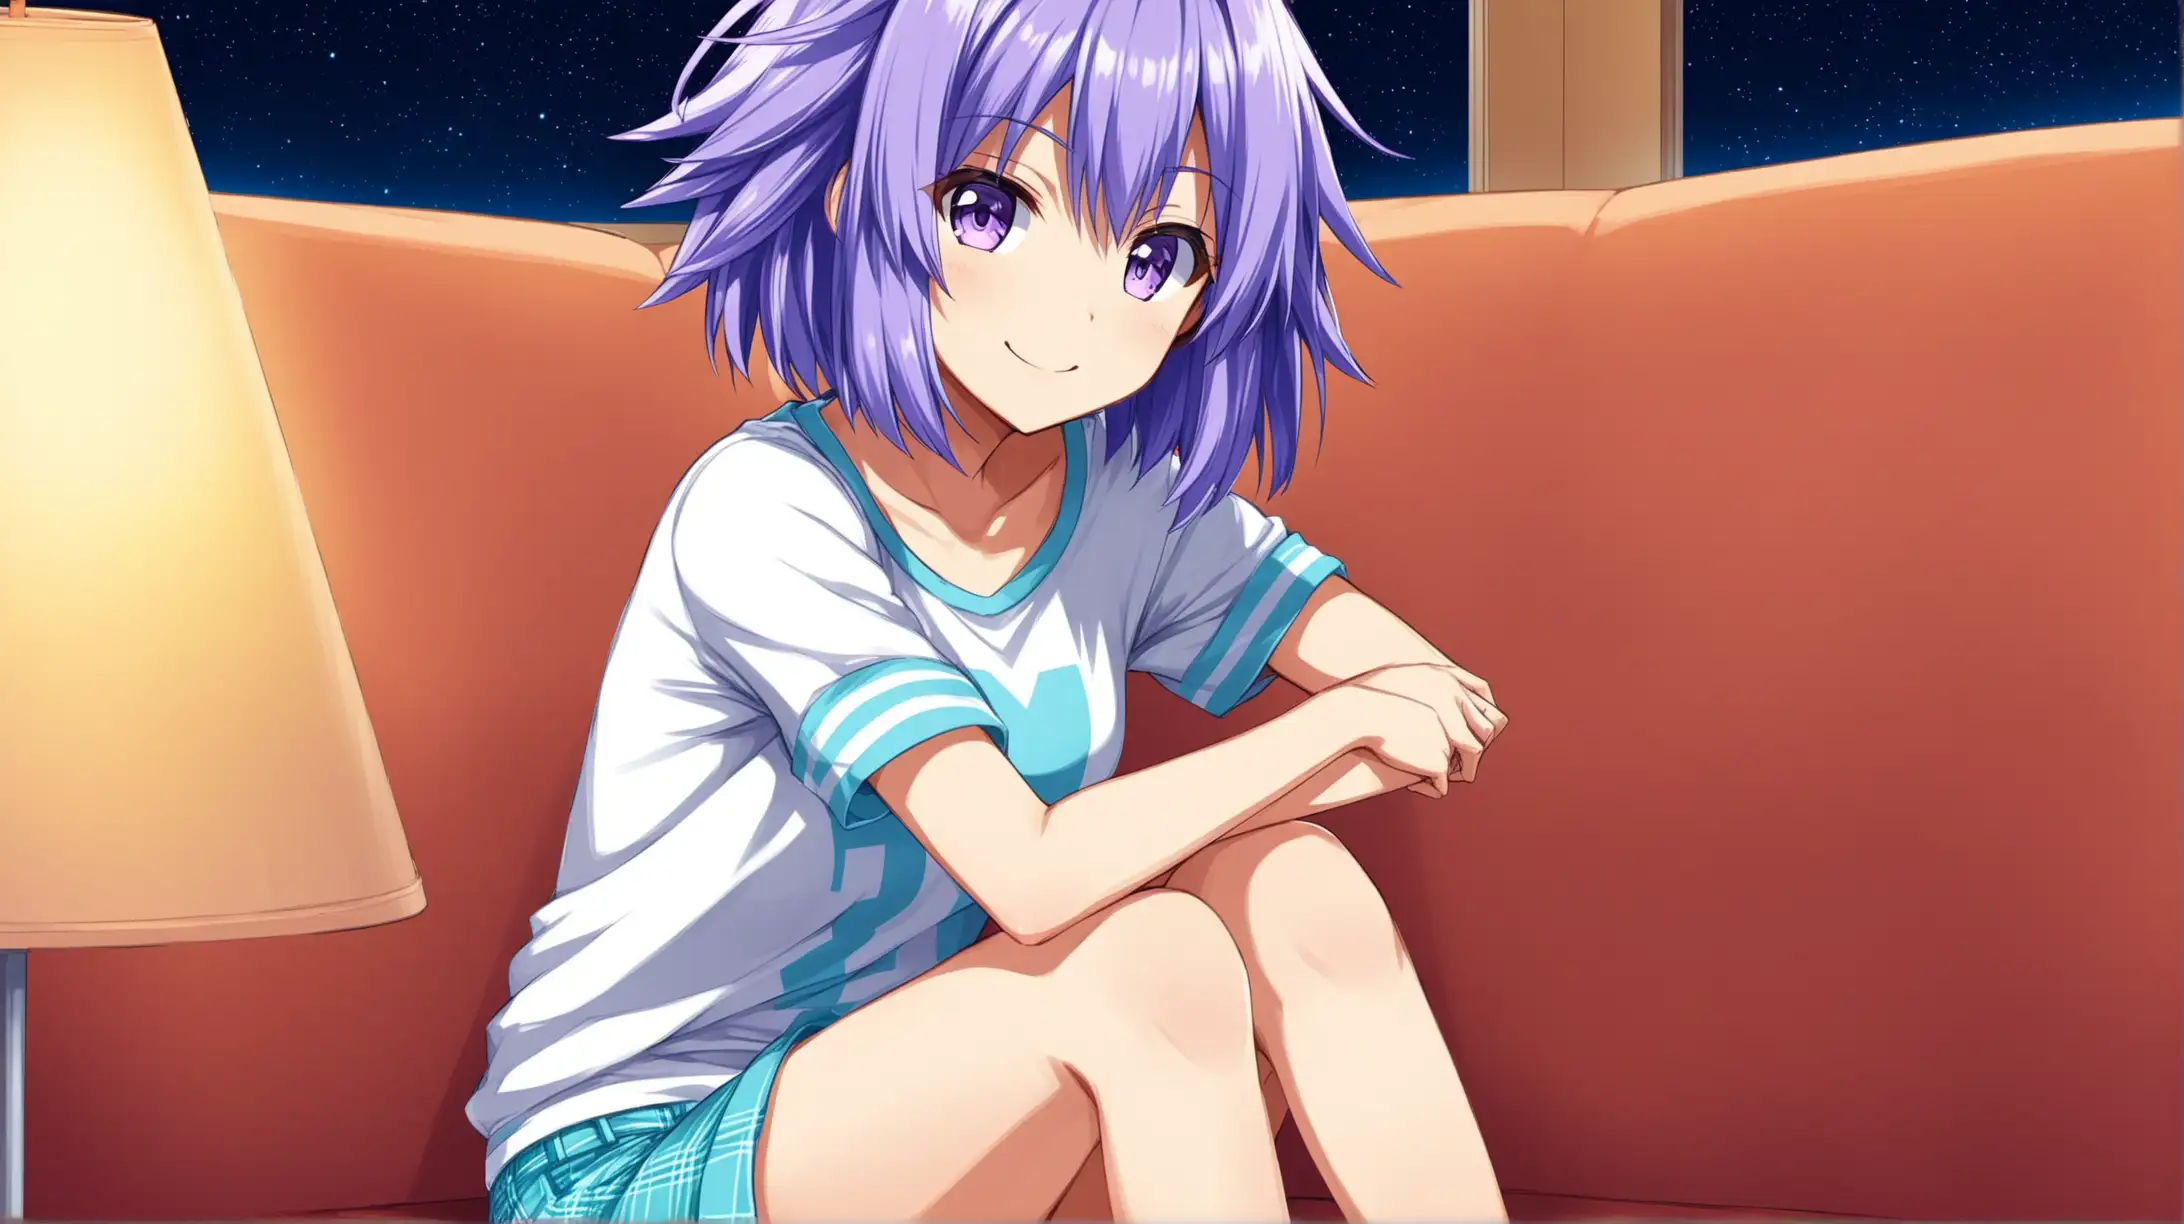 Neptune from Hyperdimension Neptunia Series Smiling Alone Indoors at Night